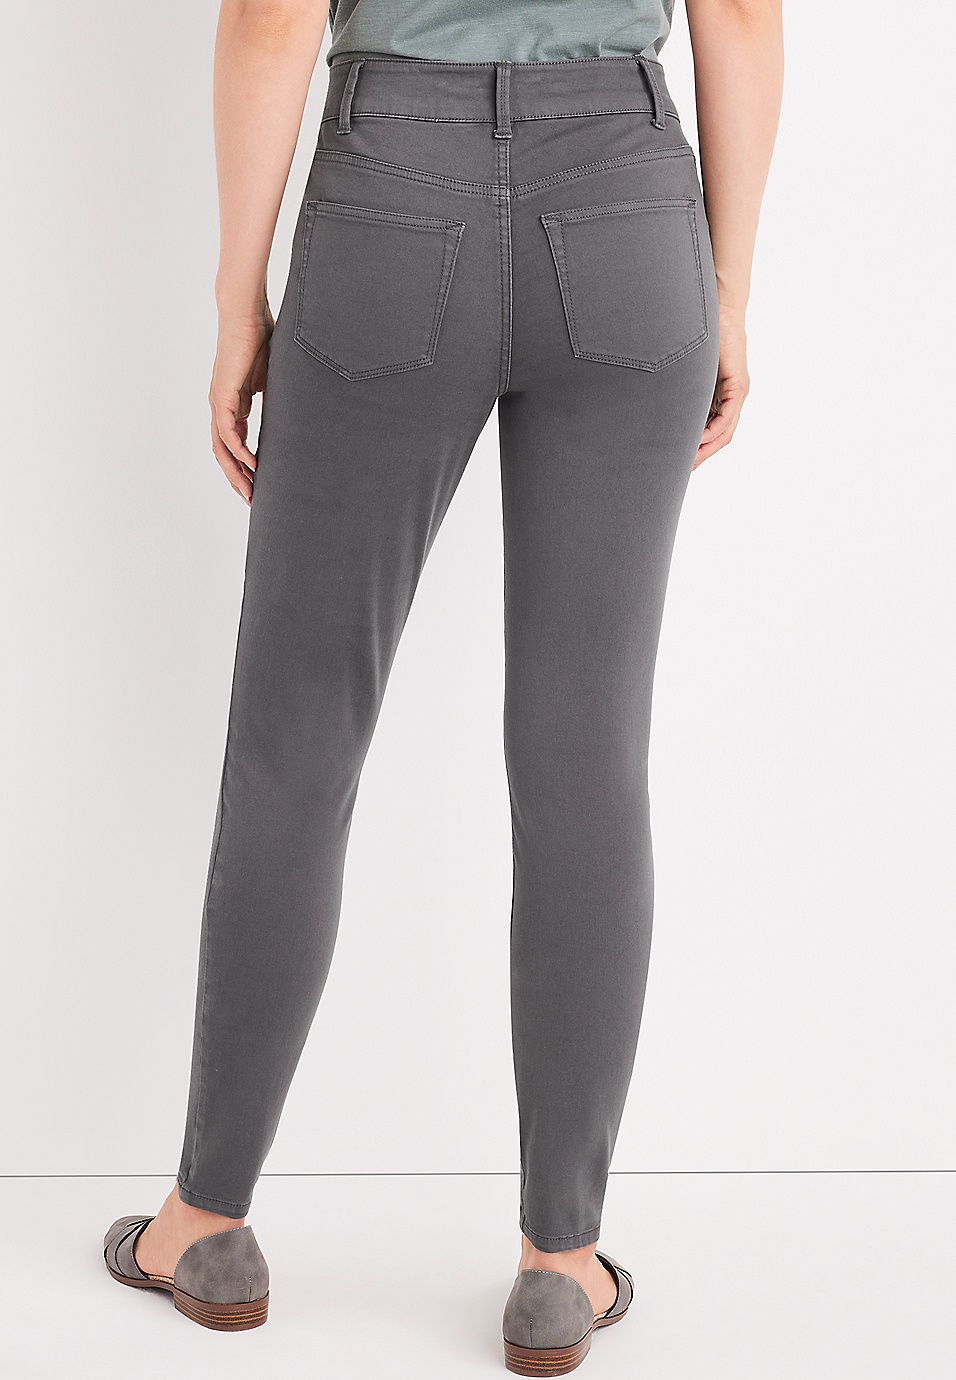 Partly Cotton Mid Rise Jeggings - Grey - Just $7